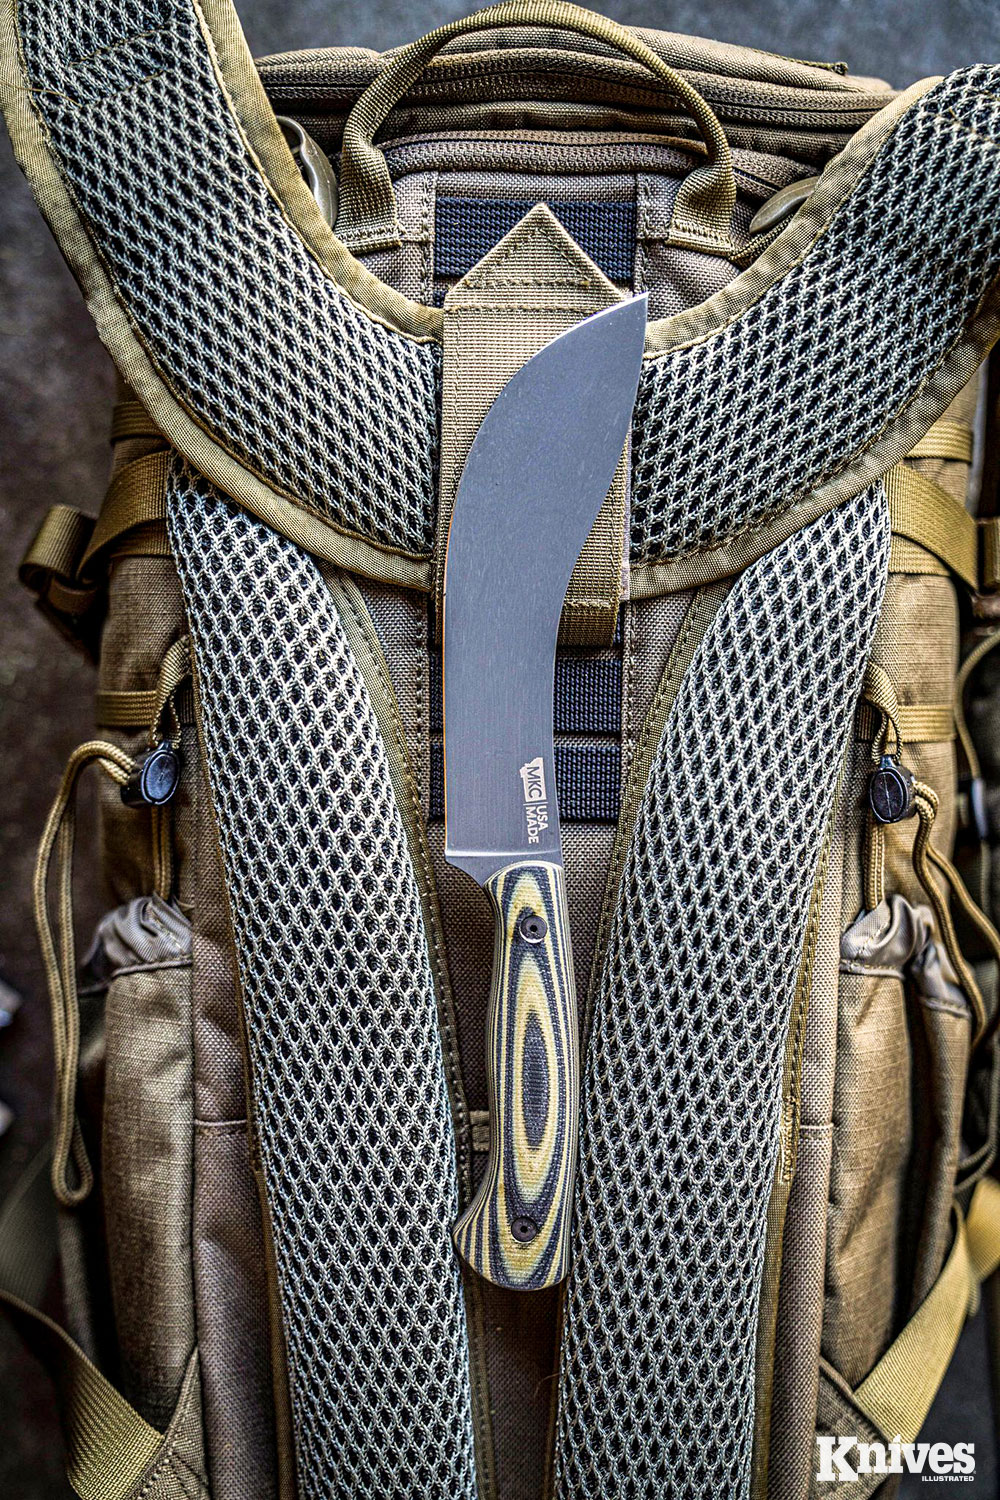 The Beartooth Pro-Skinner was designed in conjunction with professional Alaskan Bear Guide Cole Kramer. 